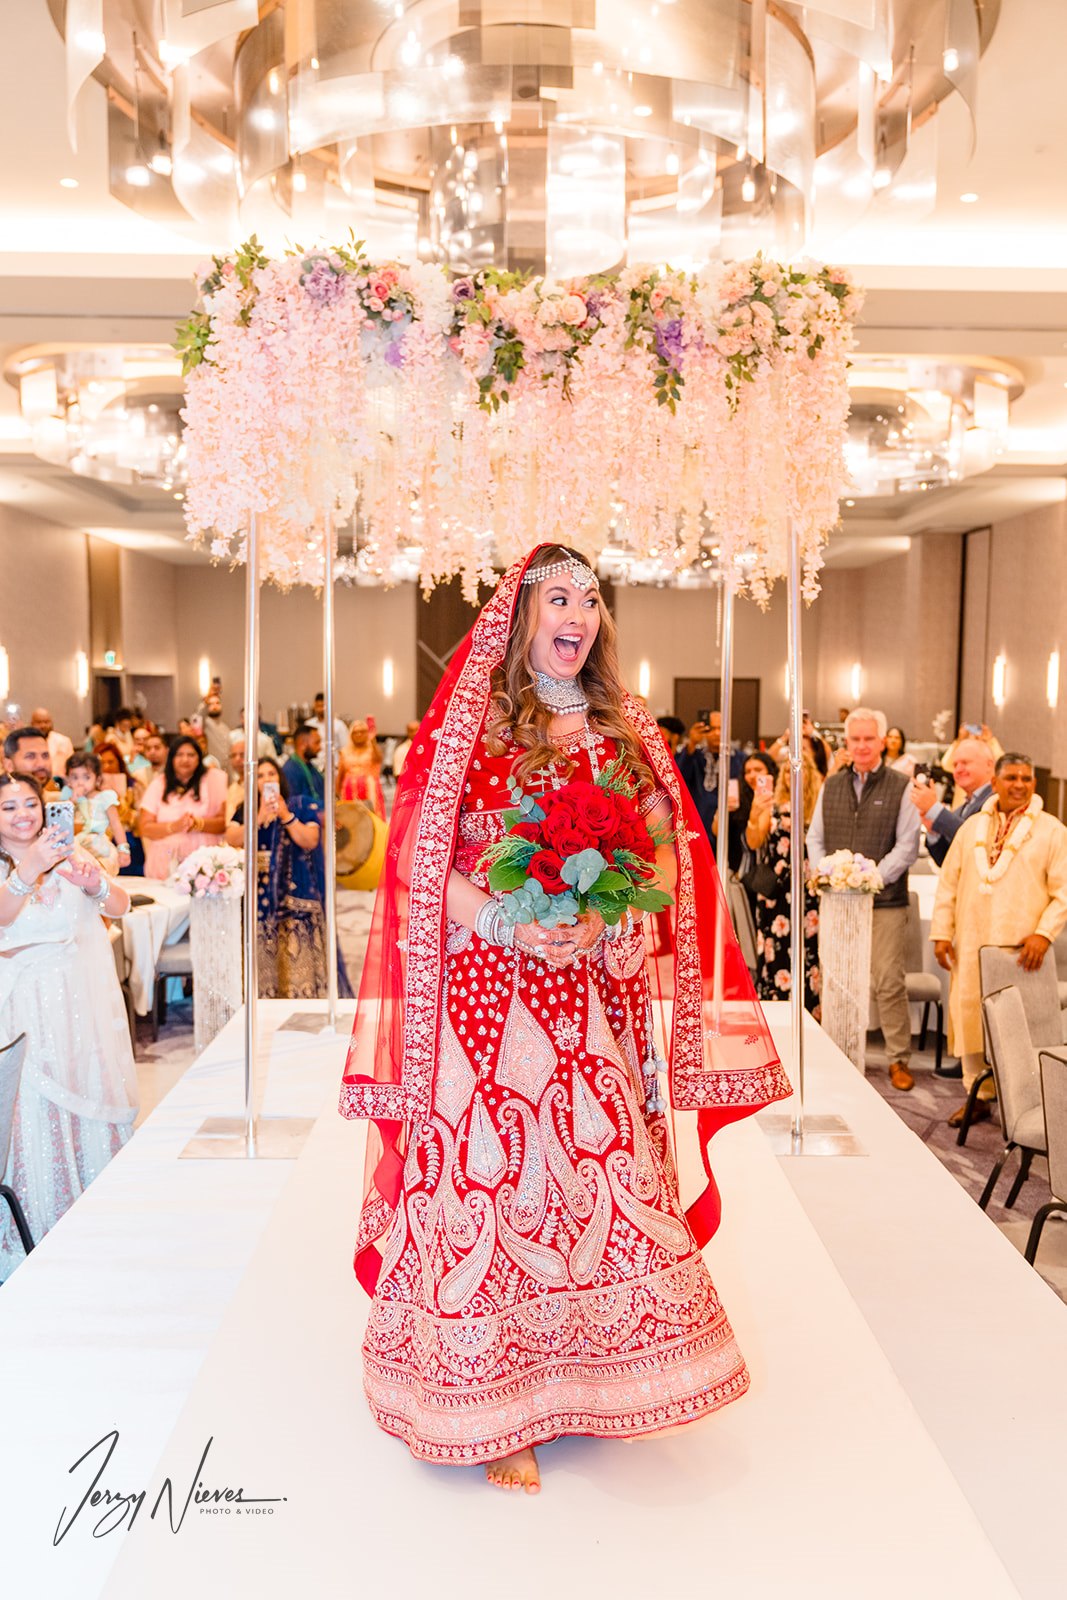 Nicole walking down the runway adorned in a traditional red Indian wedding dress, holding red flowers, as guests stand in reverence at Disney Swan Reserve.